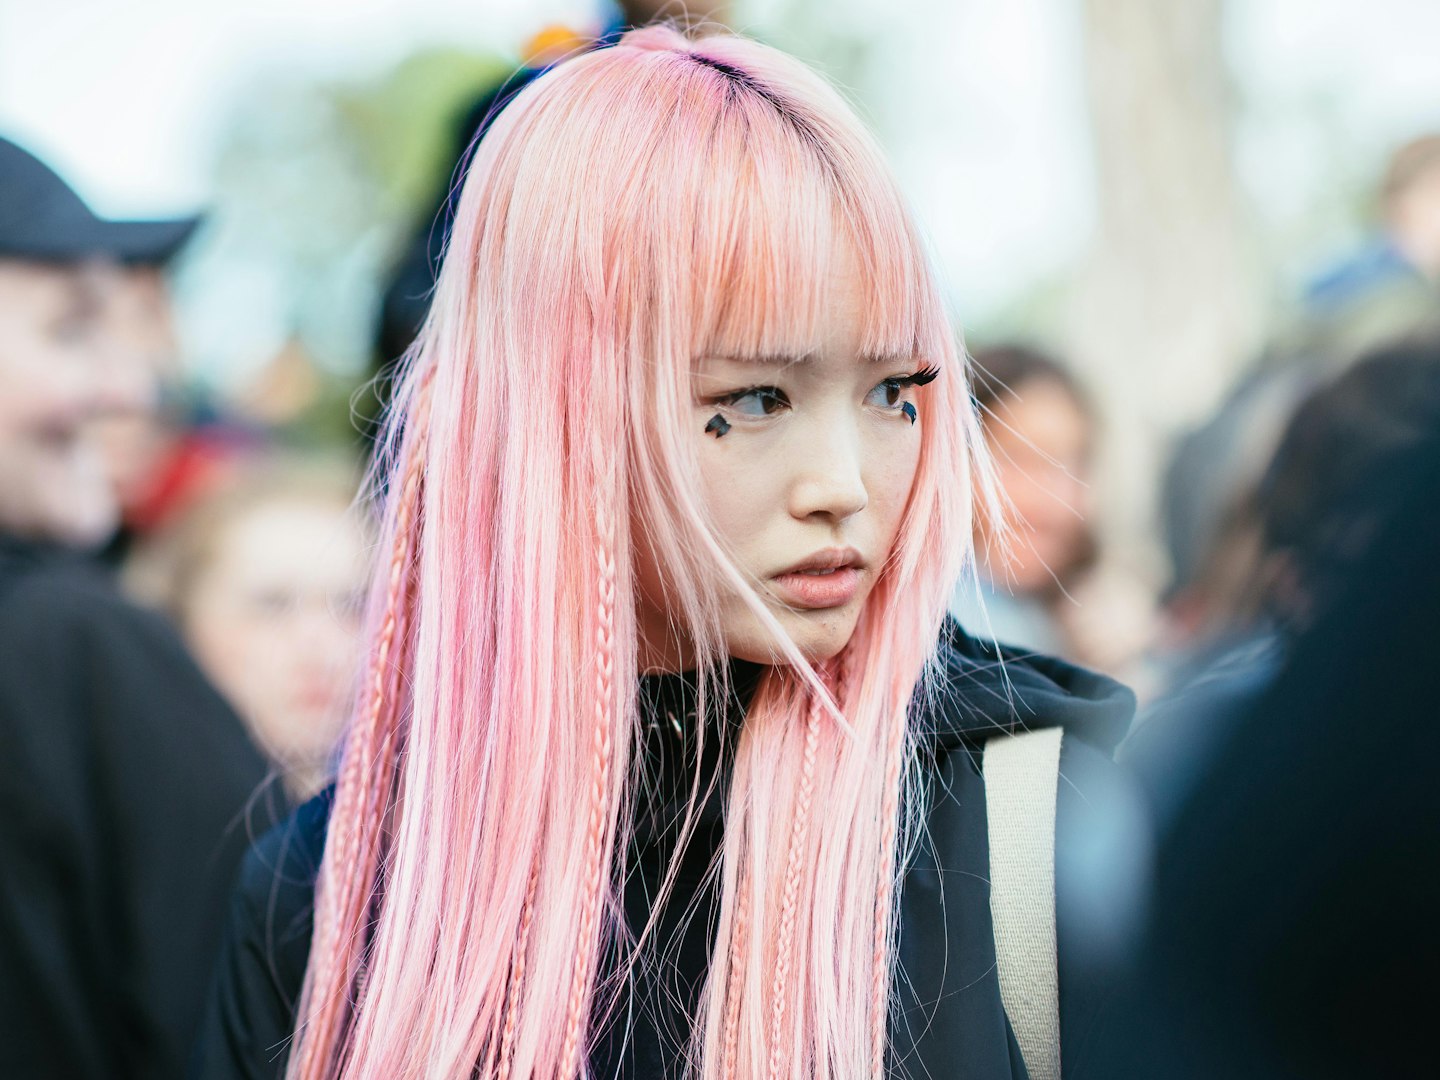 Millennial Pink: Is It Possible to Be so In Love?